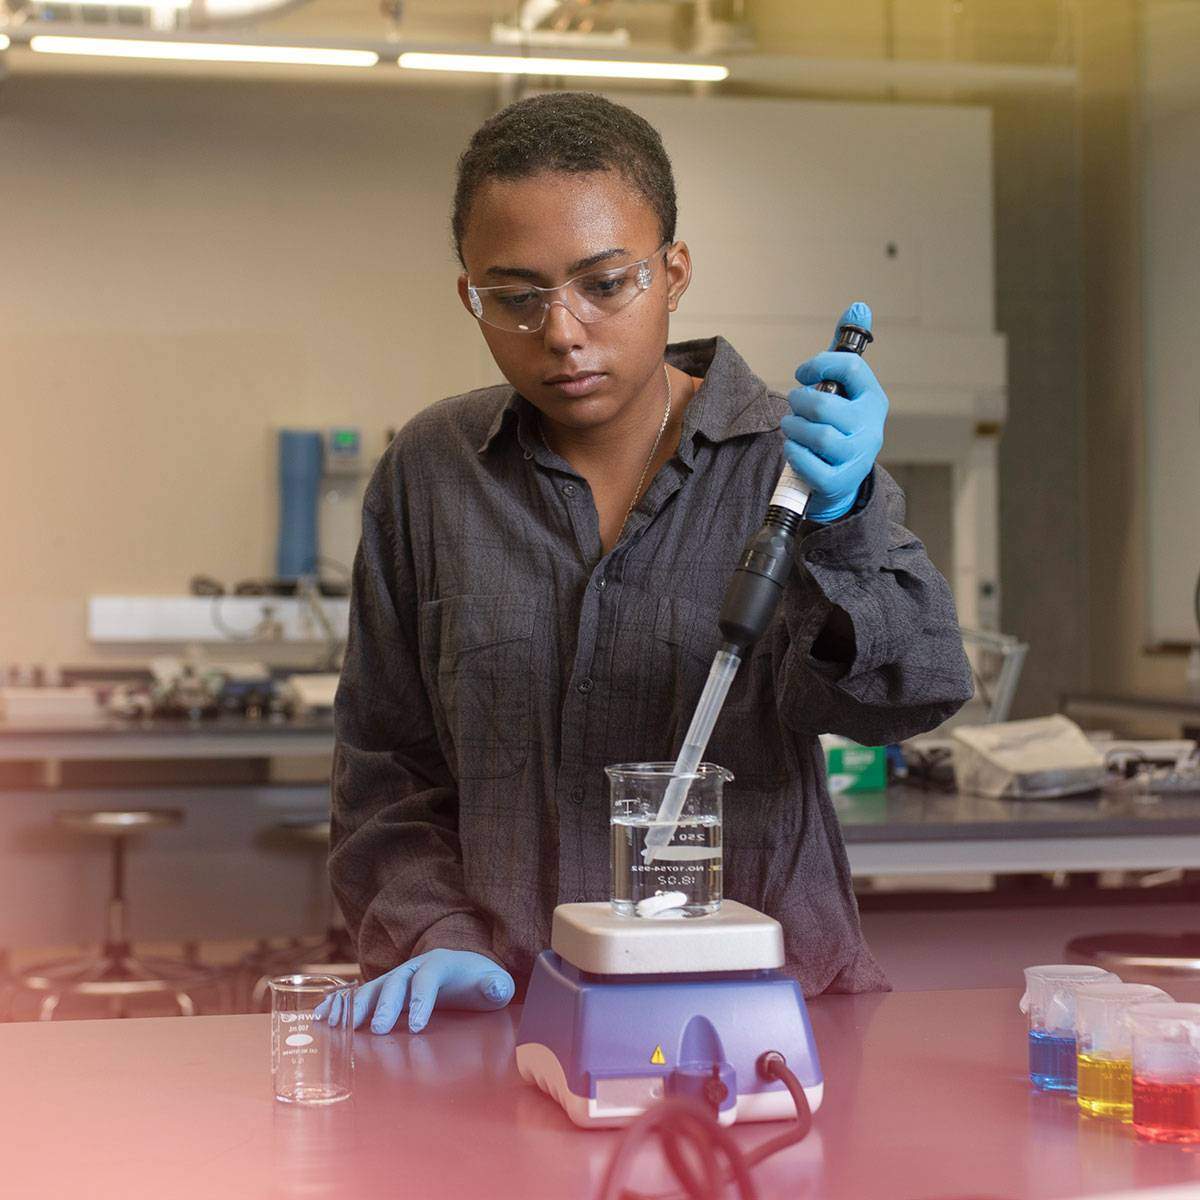 A student with close-cropped hair works in a science lab